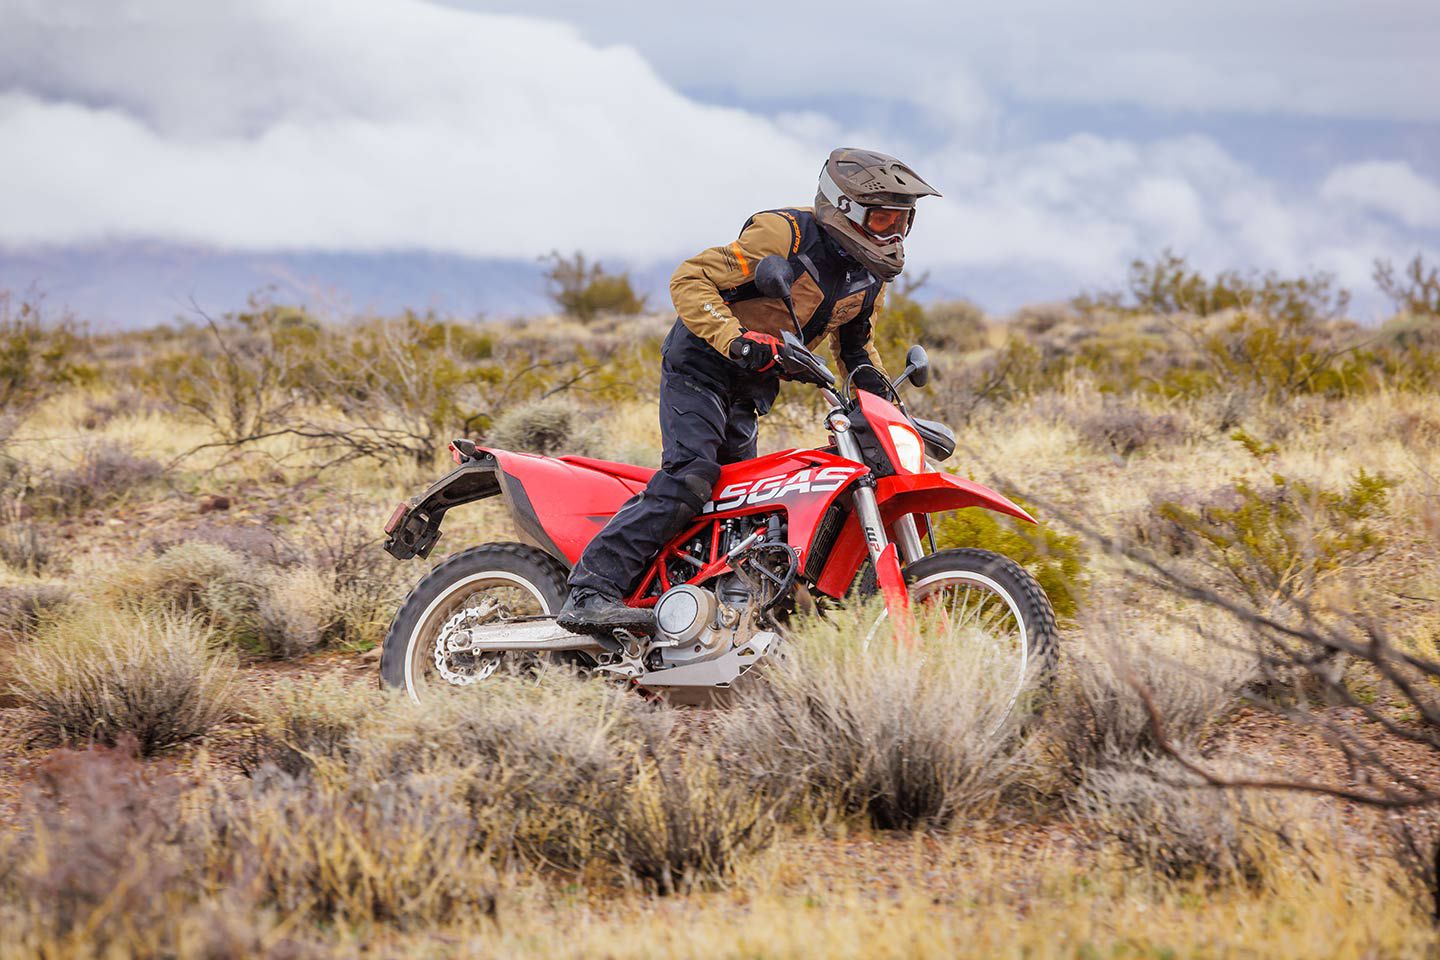 Alpinestars’ Tech-Air Off-Road is not intrusive when riding and visually unnoticeable in the front.